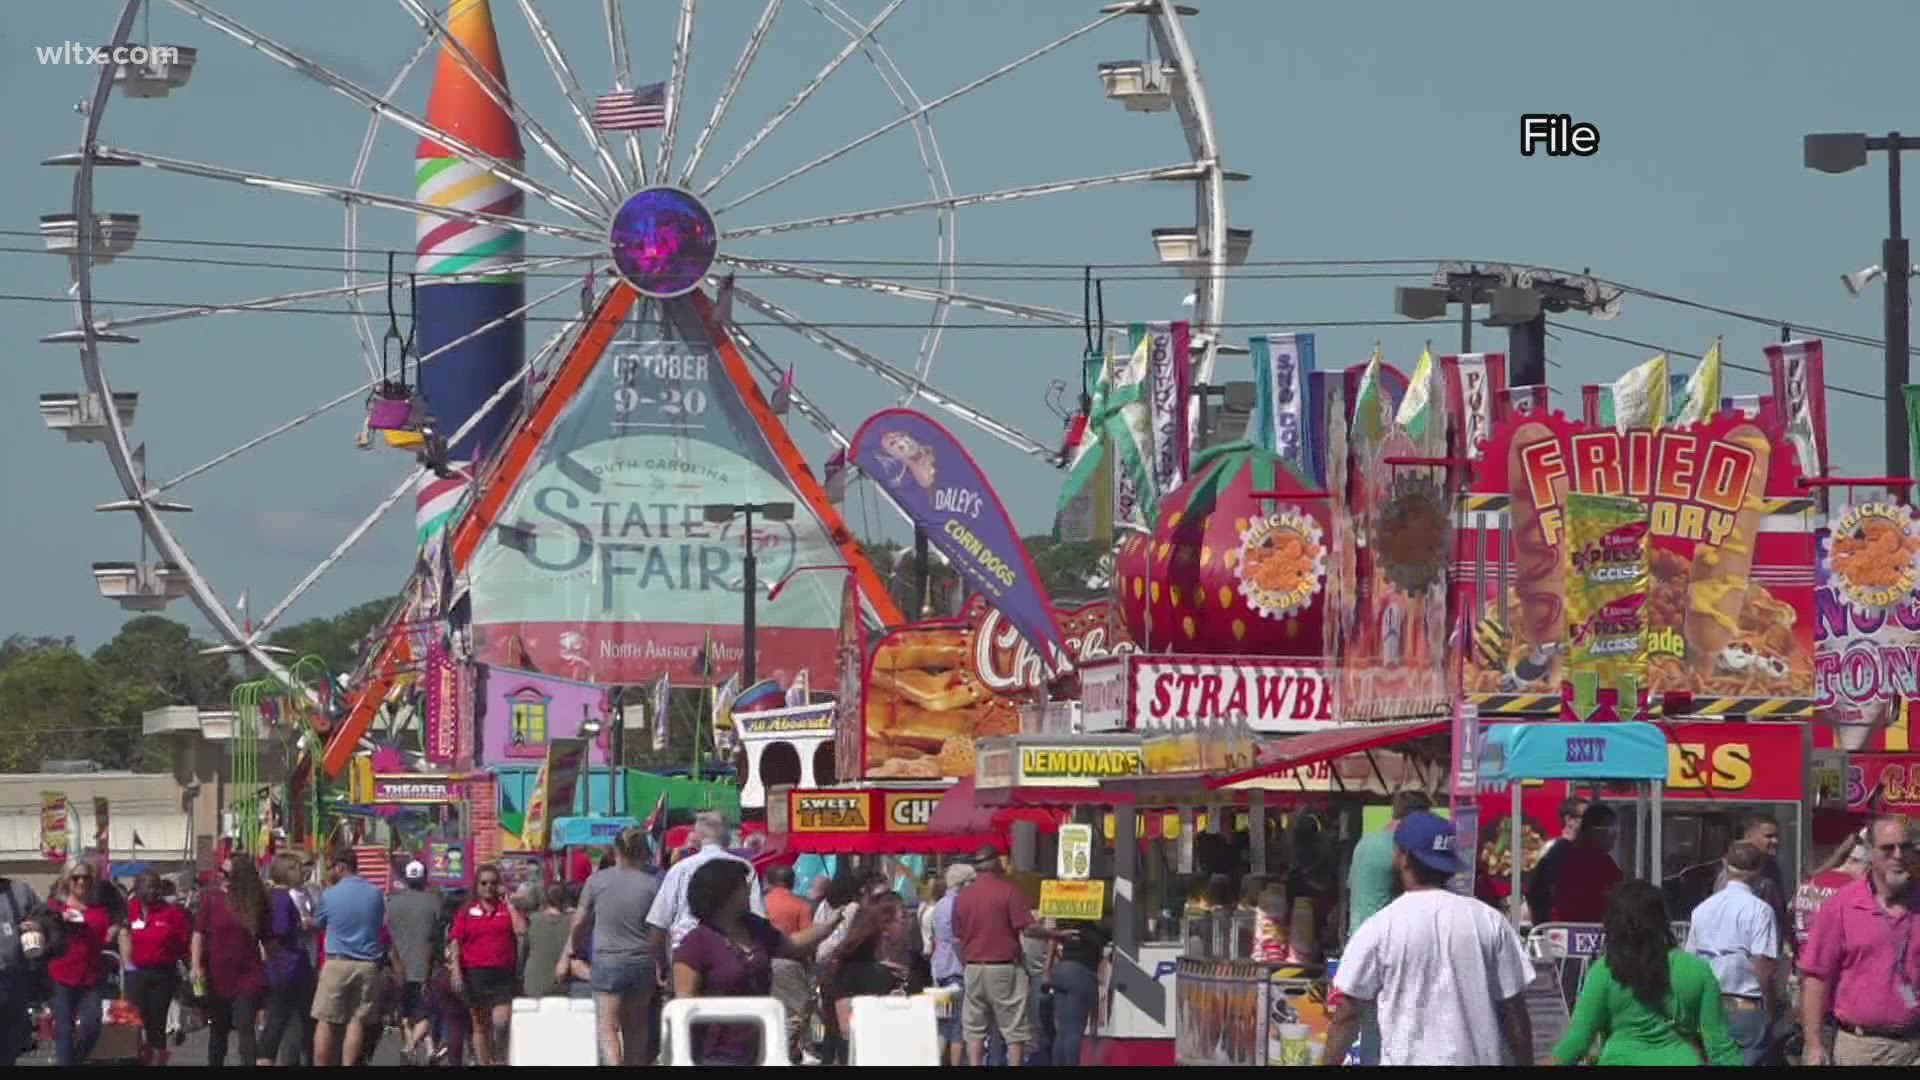 The South Carolina State Fair will once again welcome guests in person for 12 days of exhibits, competitions, food, rides, entertainment.